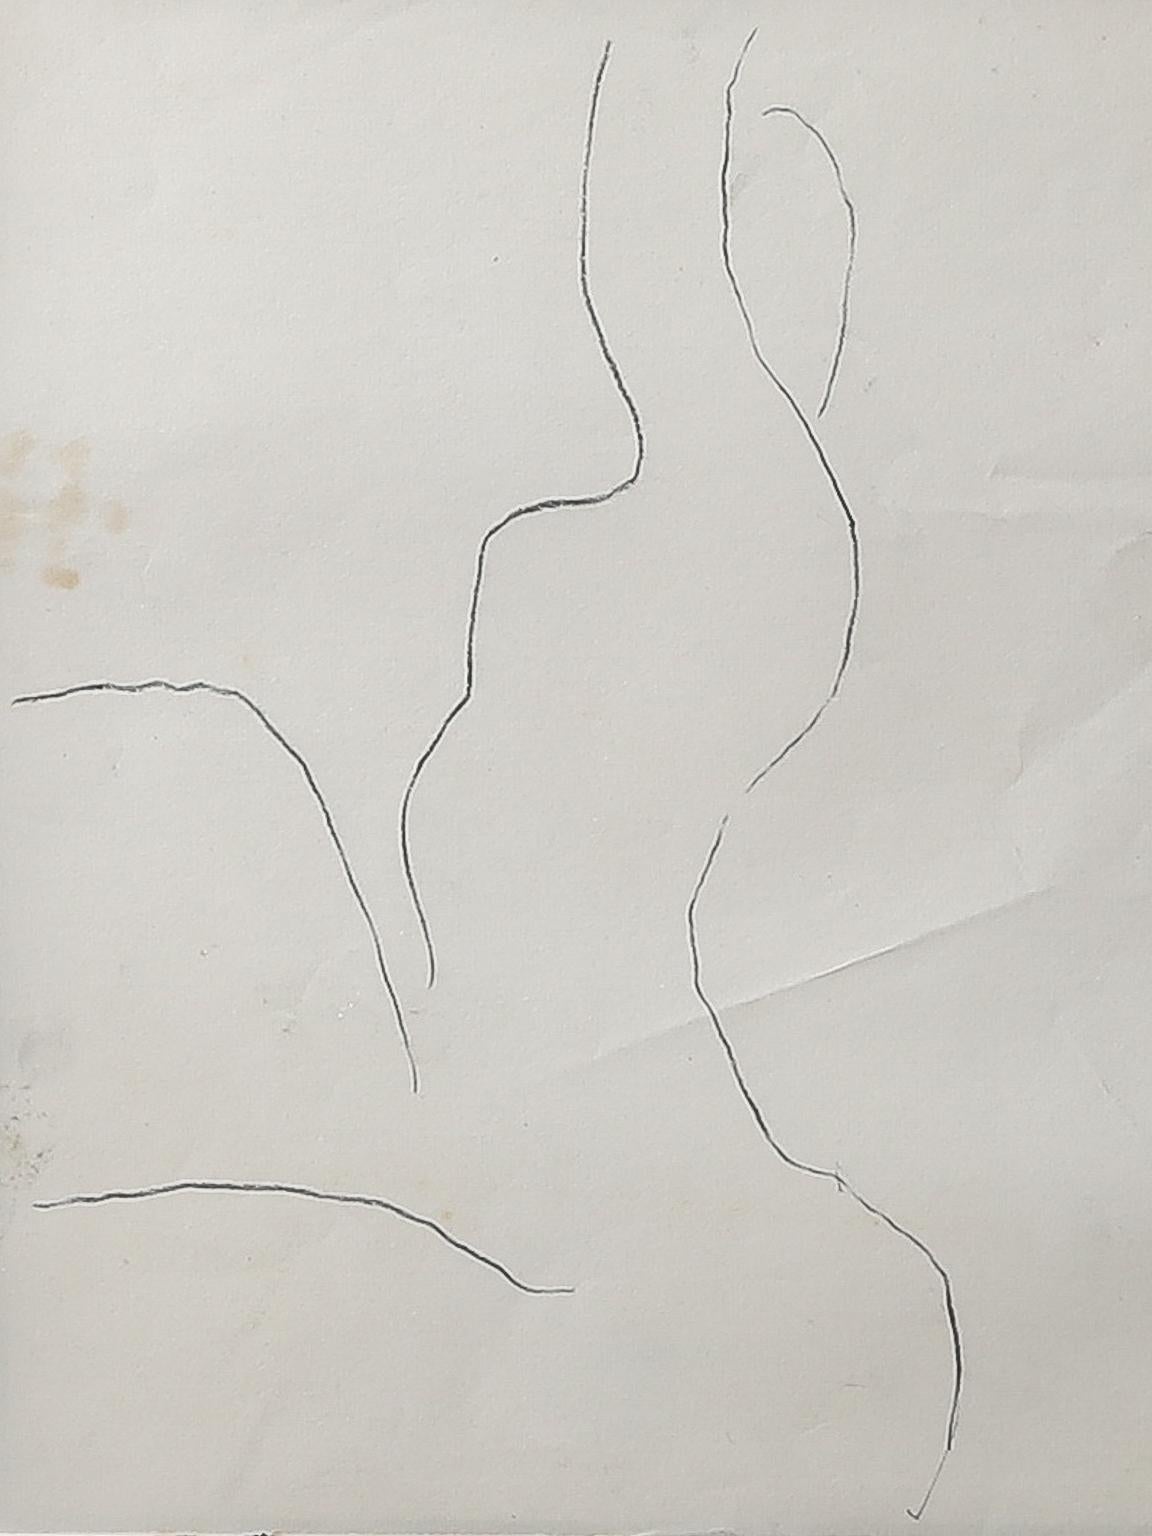 Roger Hilton, (Untitled). Charcoal and pencil on paper, circa 1970

Roger Hilton CBE (1911–1975) was a pioneer of abstract art in post-Second World War Britain. He was born in 1911 in Northwood, Middlesex, and studied at the Slade School of Fine Art